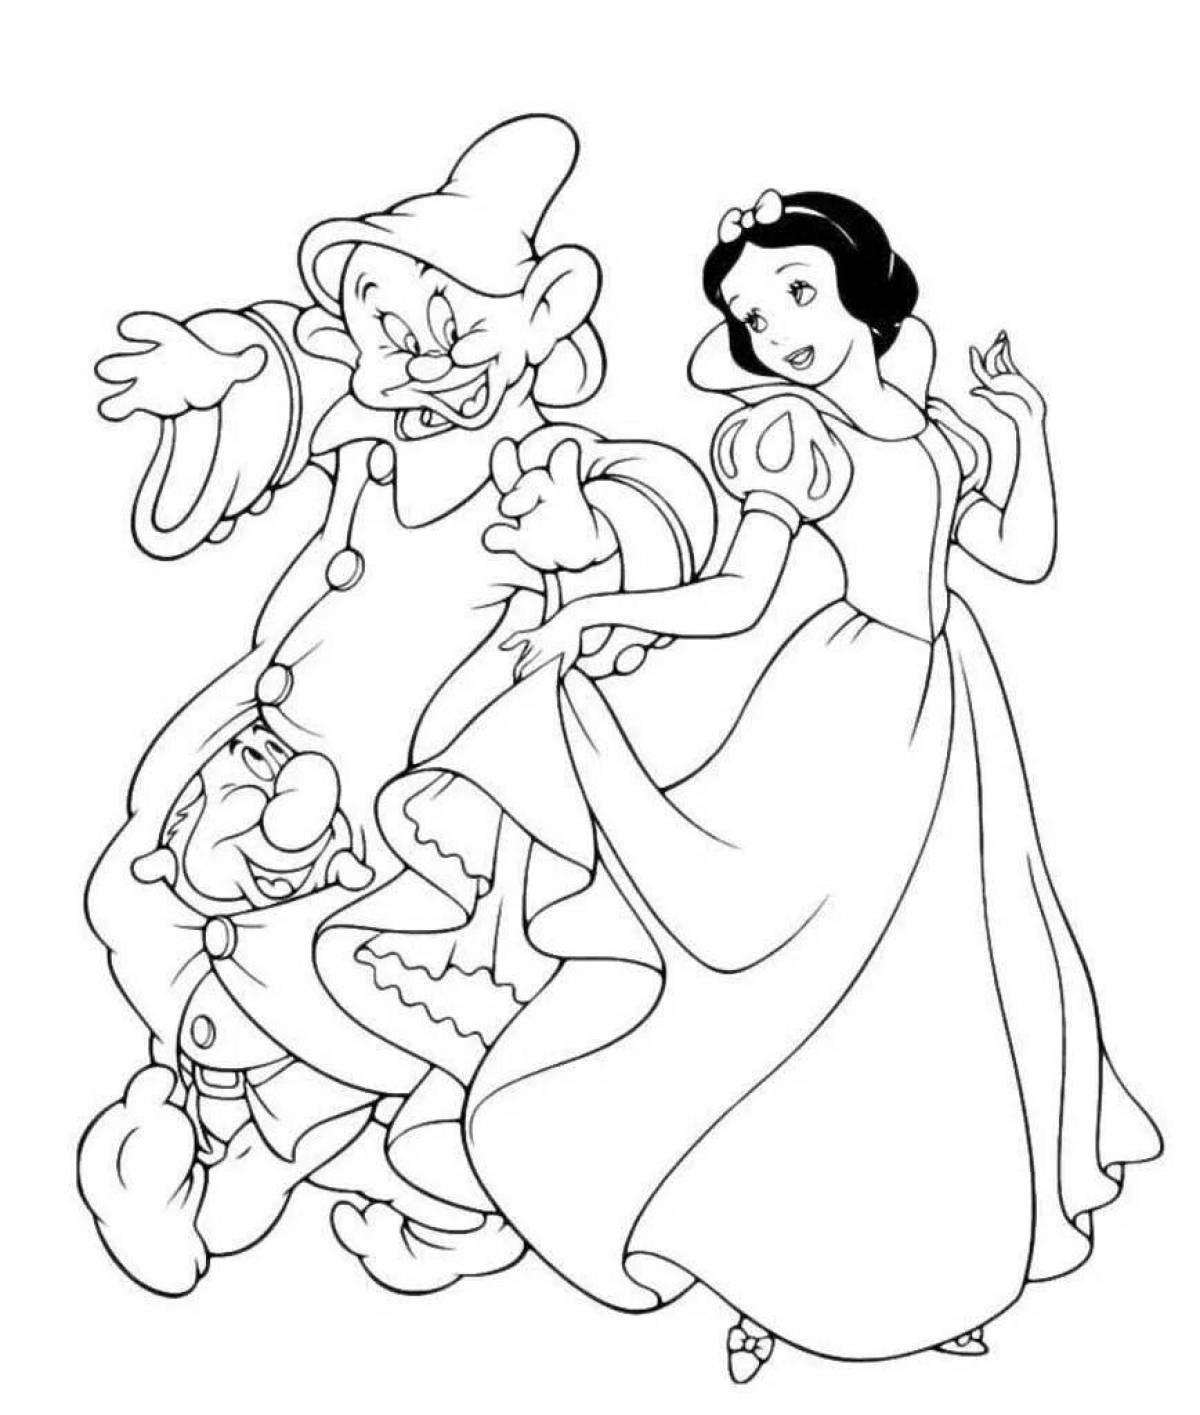 Violent snow white coloring for girls